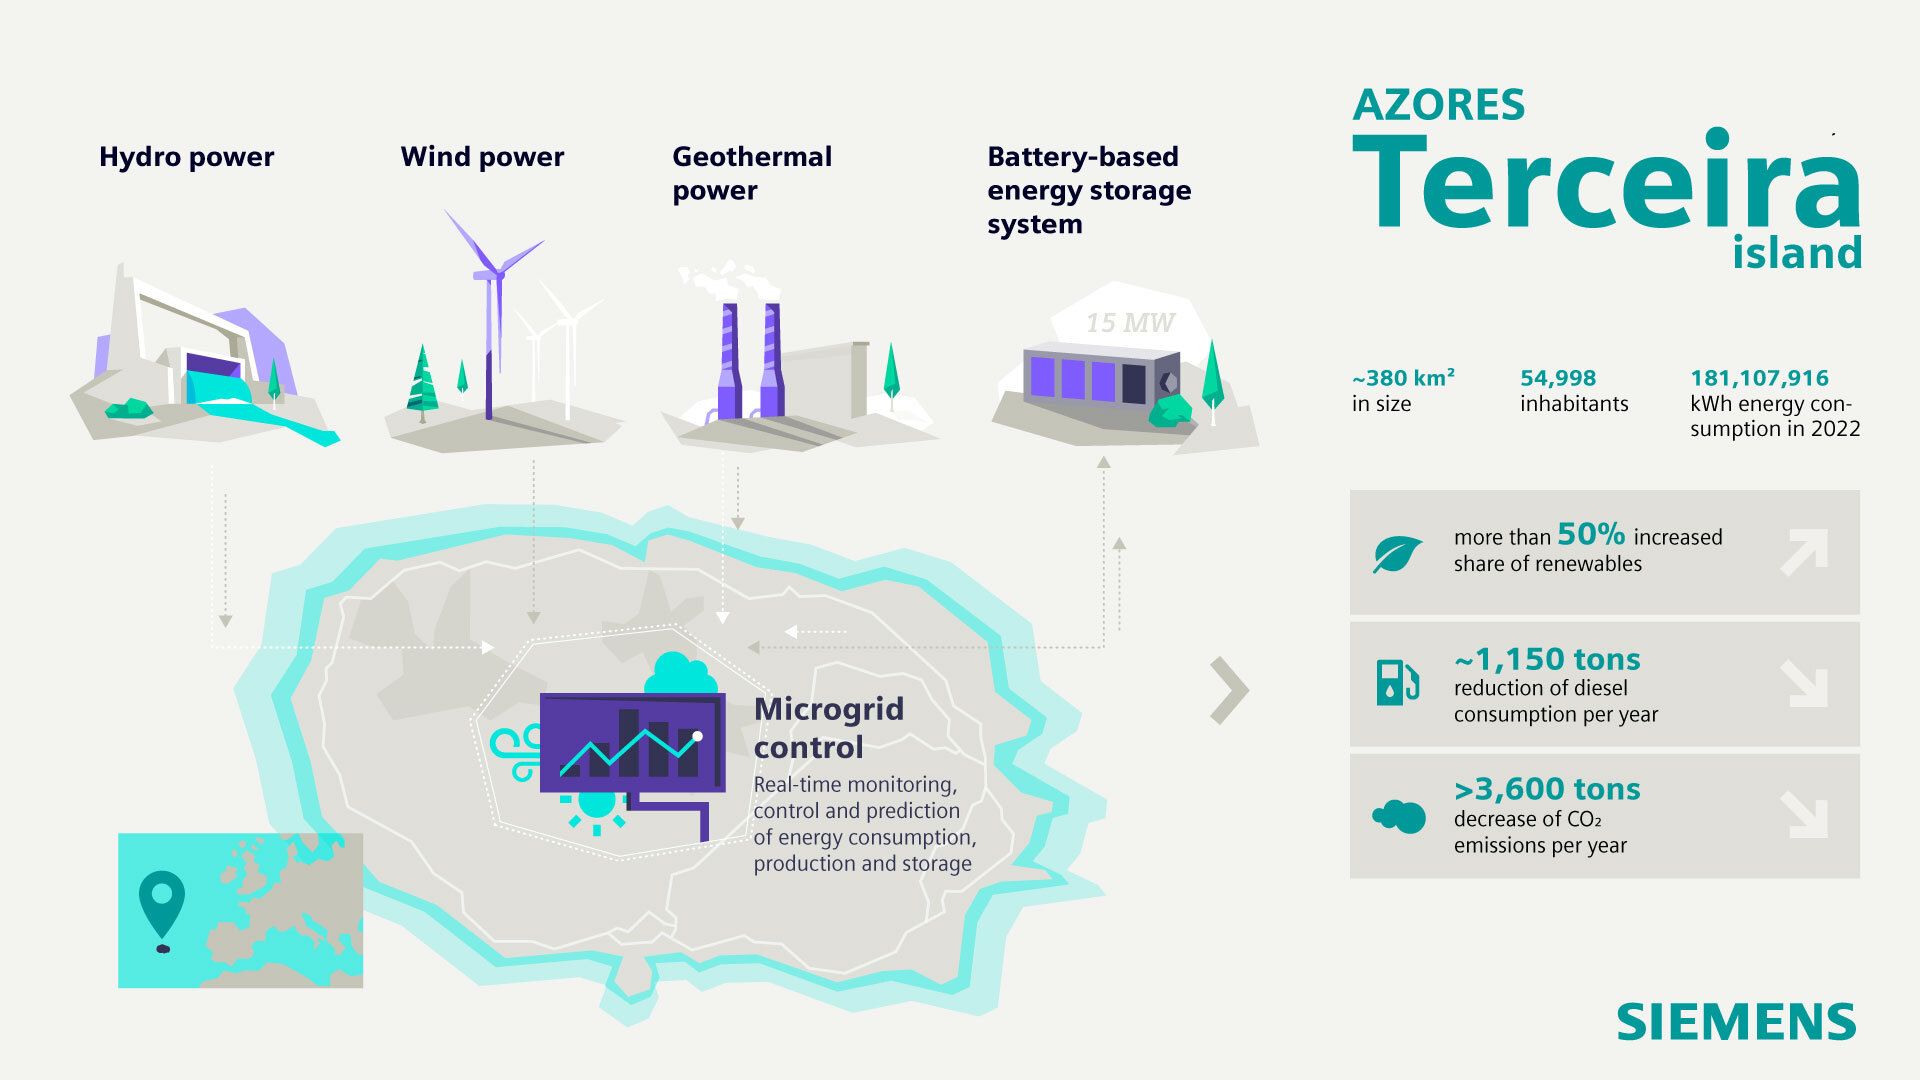 Siemens completes Azores sustainable power project, creating a